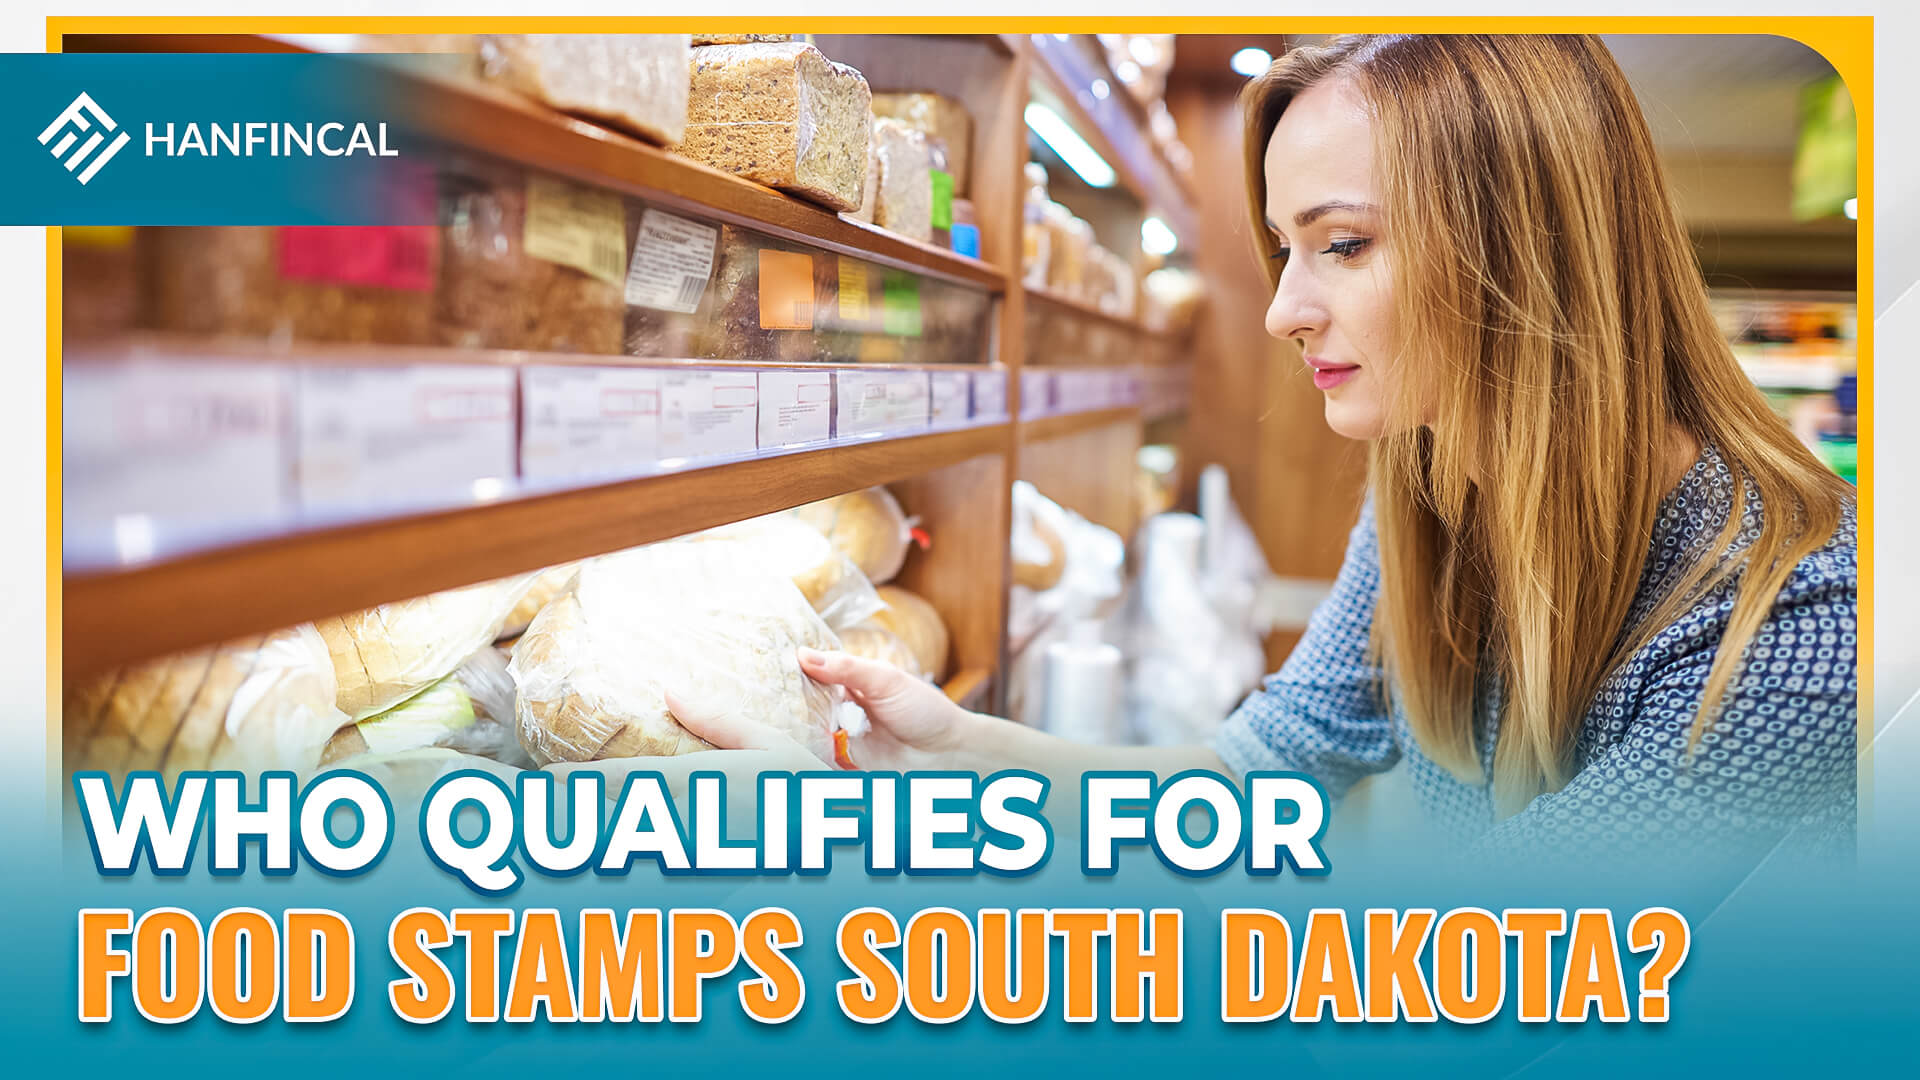 How To Apply For Food Stamps In South Dakota